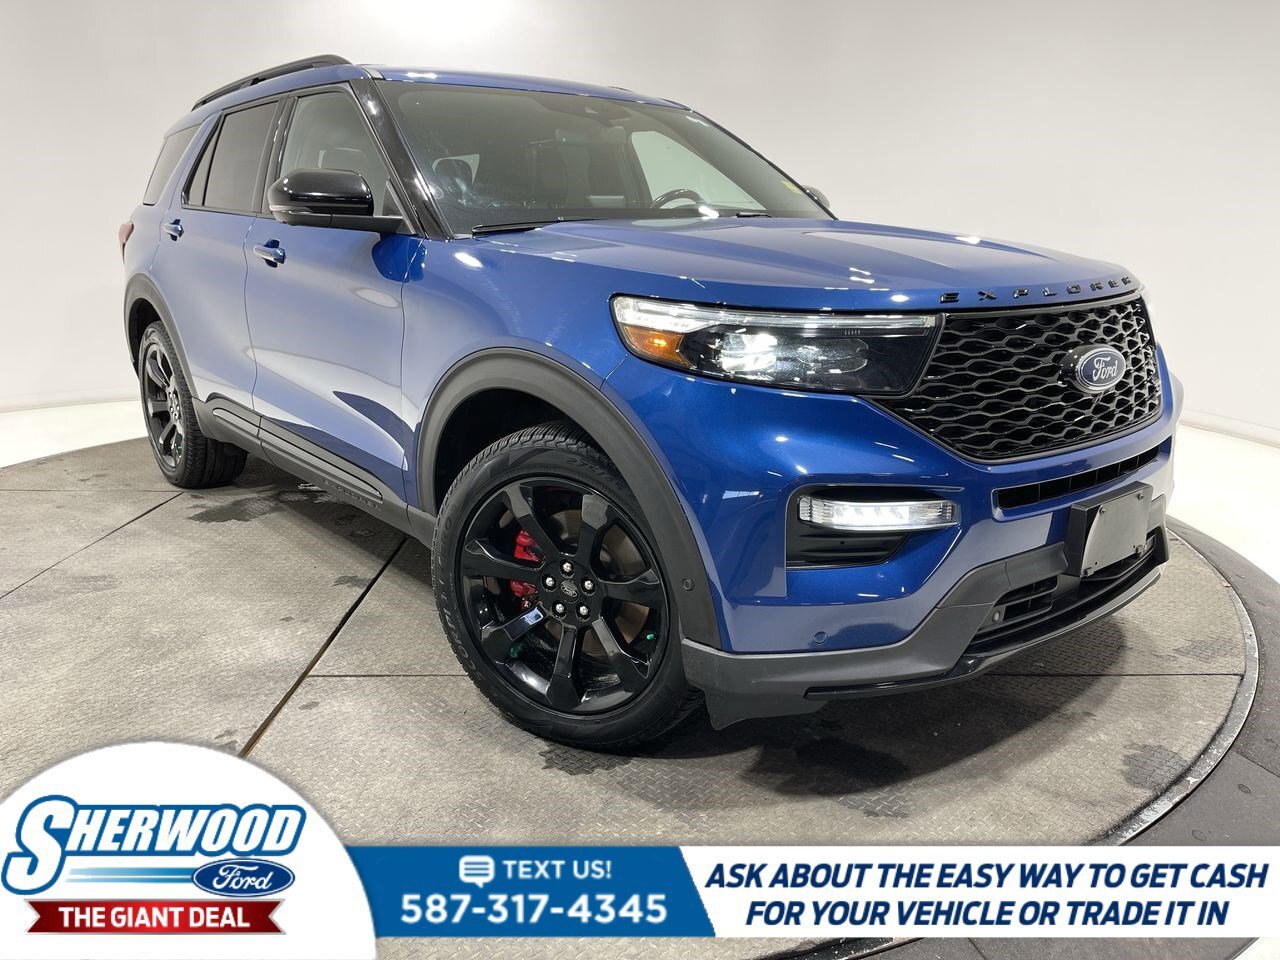 2020 Ford Explorer ST 4WD - $0 Down $189 Weekly - CLEAN CARFAX